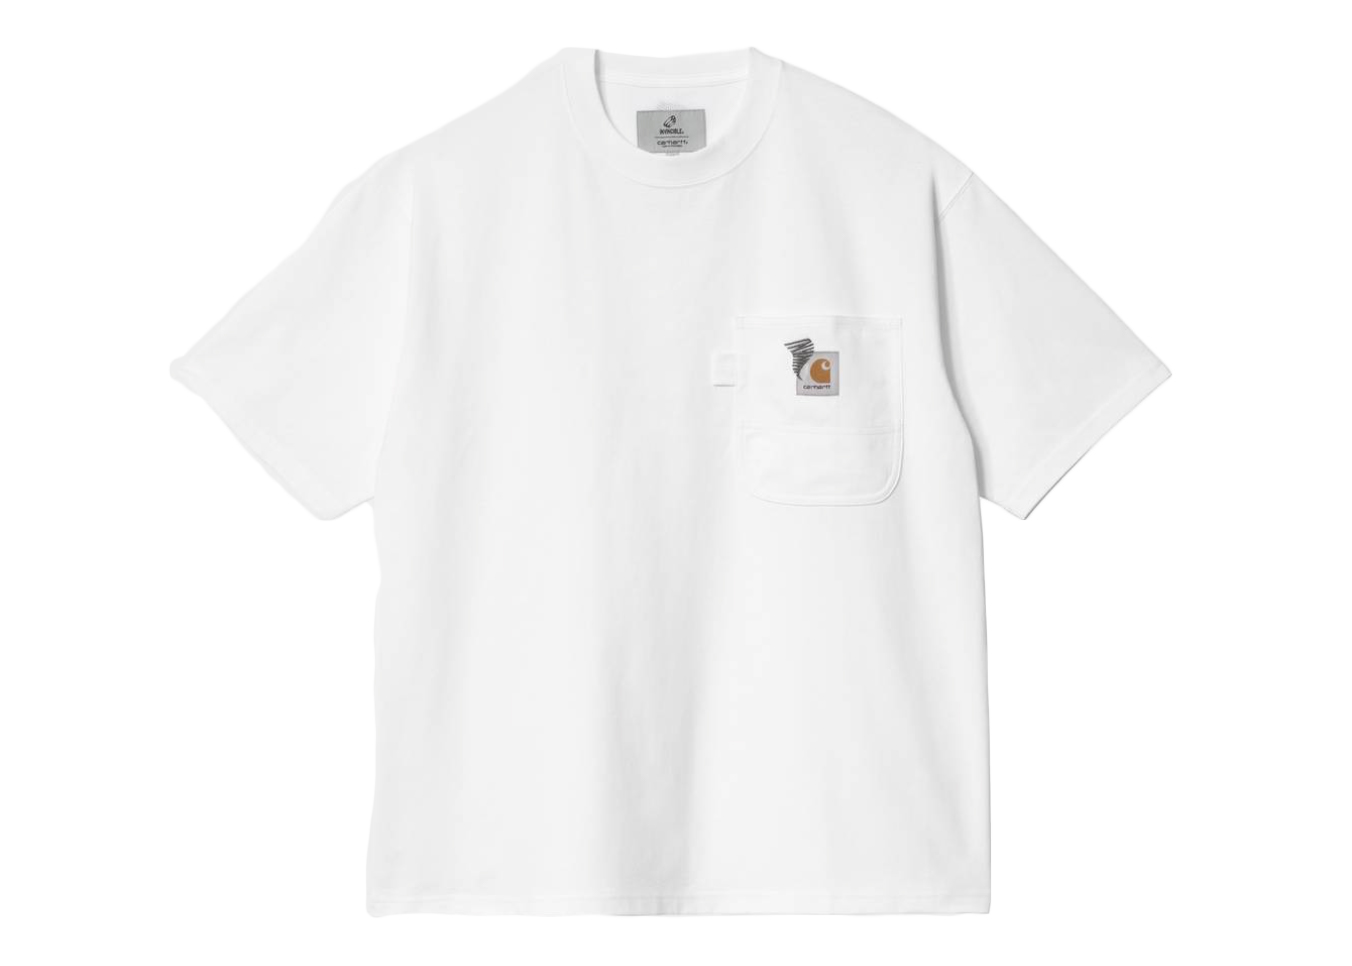 Carhartt WIP x Invincible S/S Pocket T-Shirt White 男士- SS23 - TW